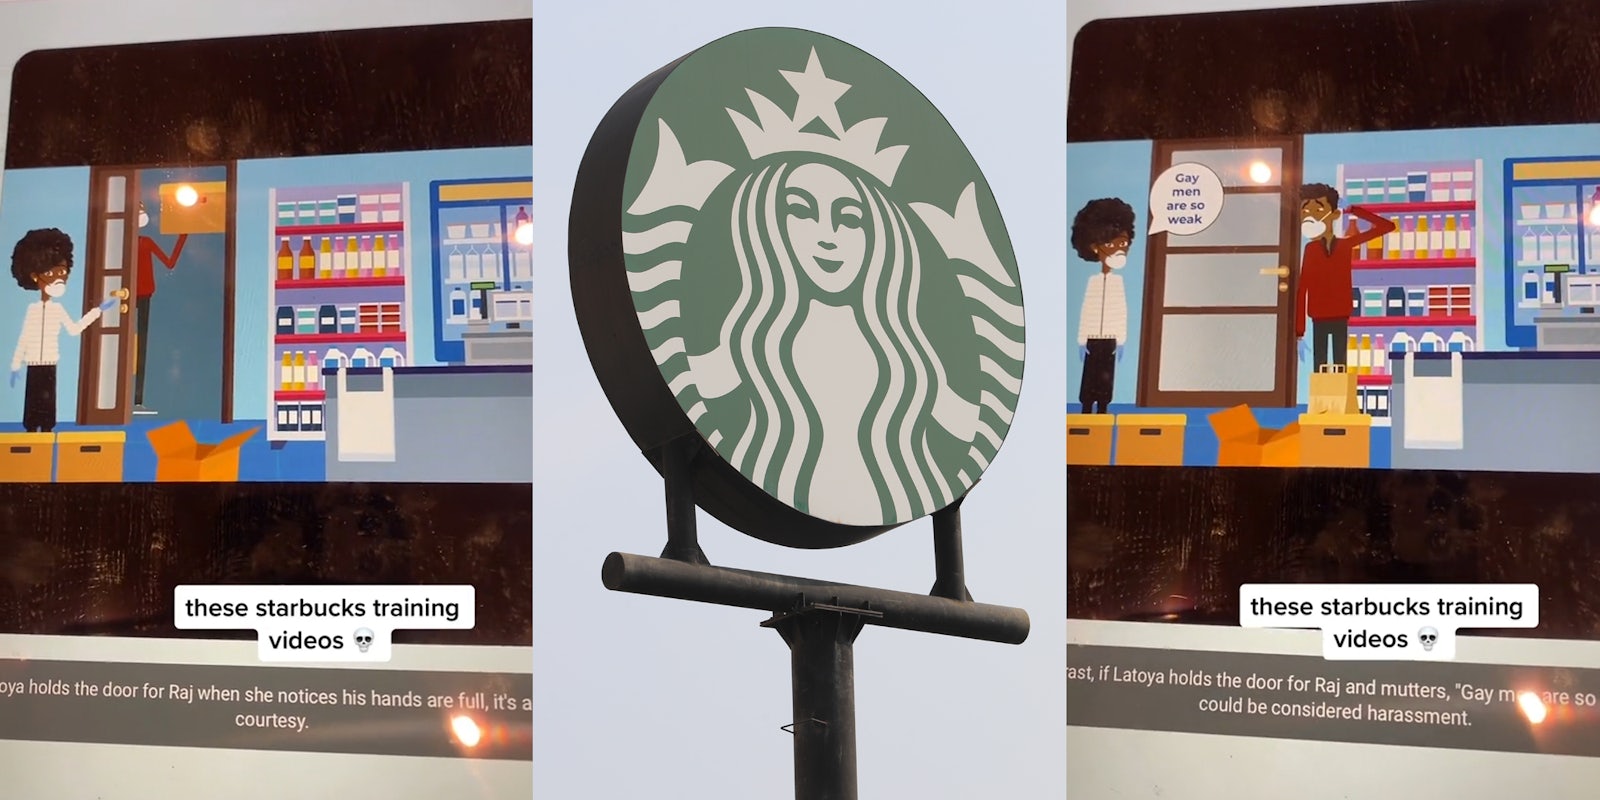 Starbucks training video with caption 'these starbucks training videos' 'holds the door for Raj when she notices his hands are full' (l) Starbucks sign with sky (c) Starbucks training video with caption 'these starbucks training videos' 'if Latoya holds the door for Raj and mutters 'Gay men are so weak' could be considered harassment' (r)